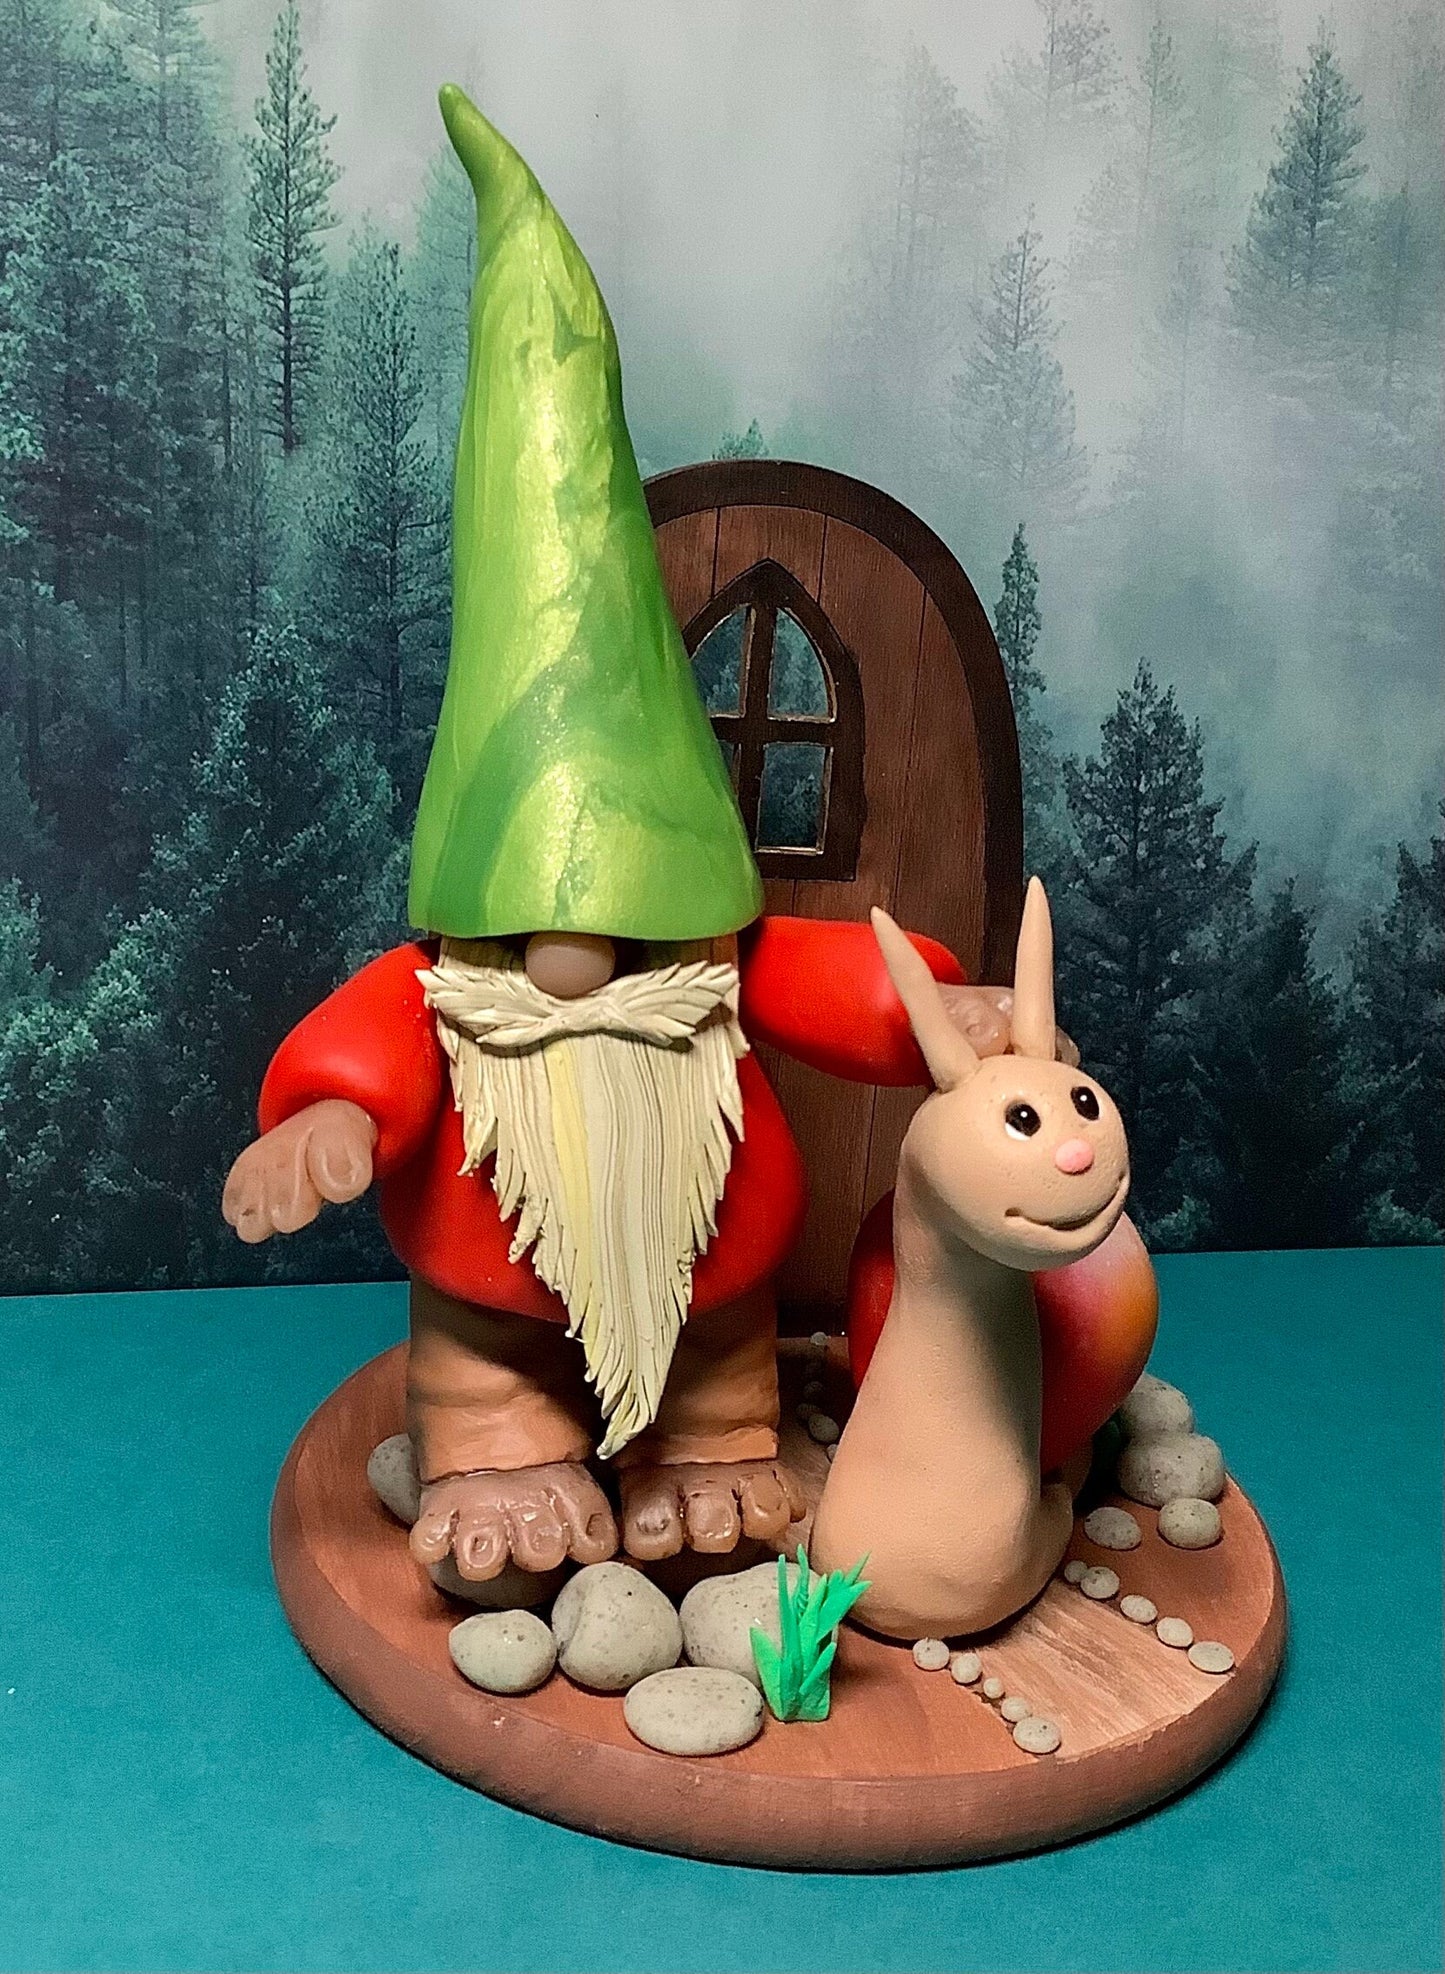 Bearded Gnome & Snail Buddy With Red Apple, Adorable Polymer Clay Figures, Wood Fairy House Door, Wood Base, Clay Stepping Stones